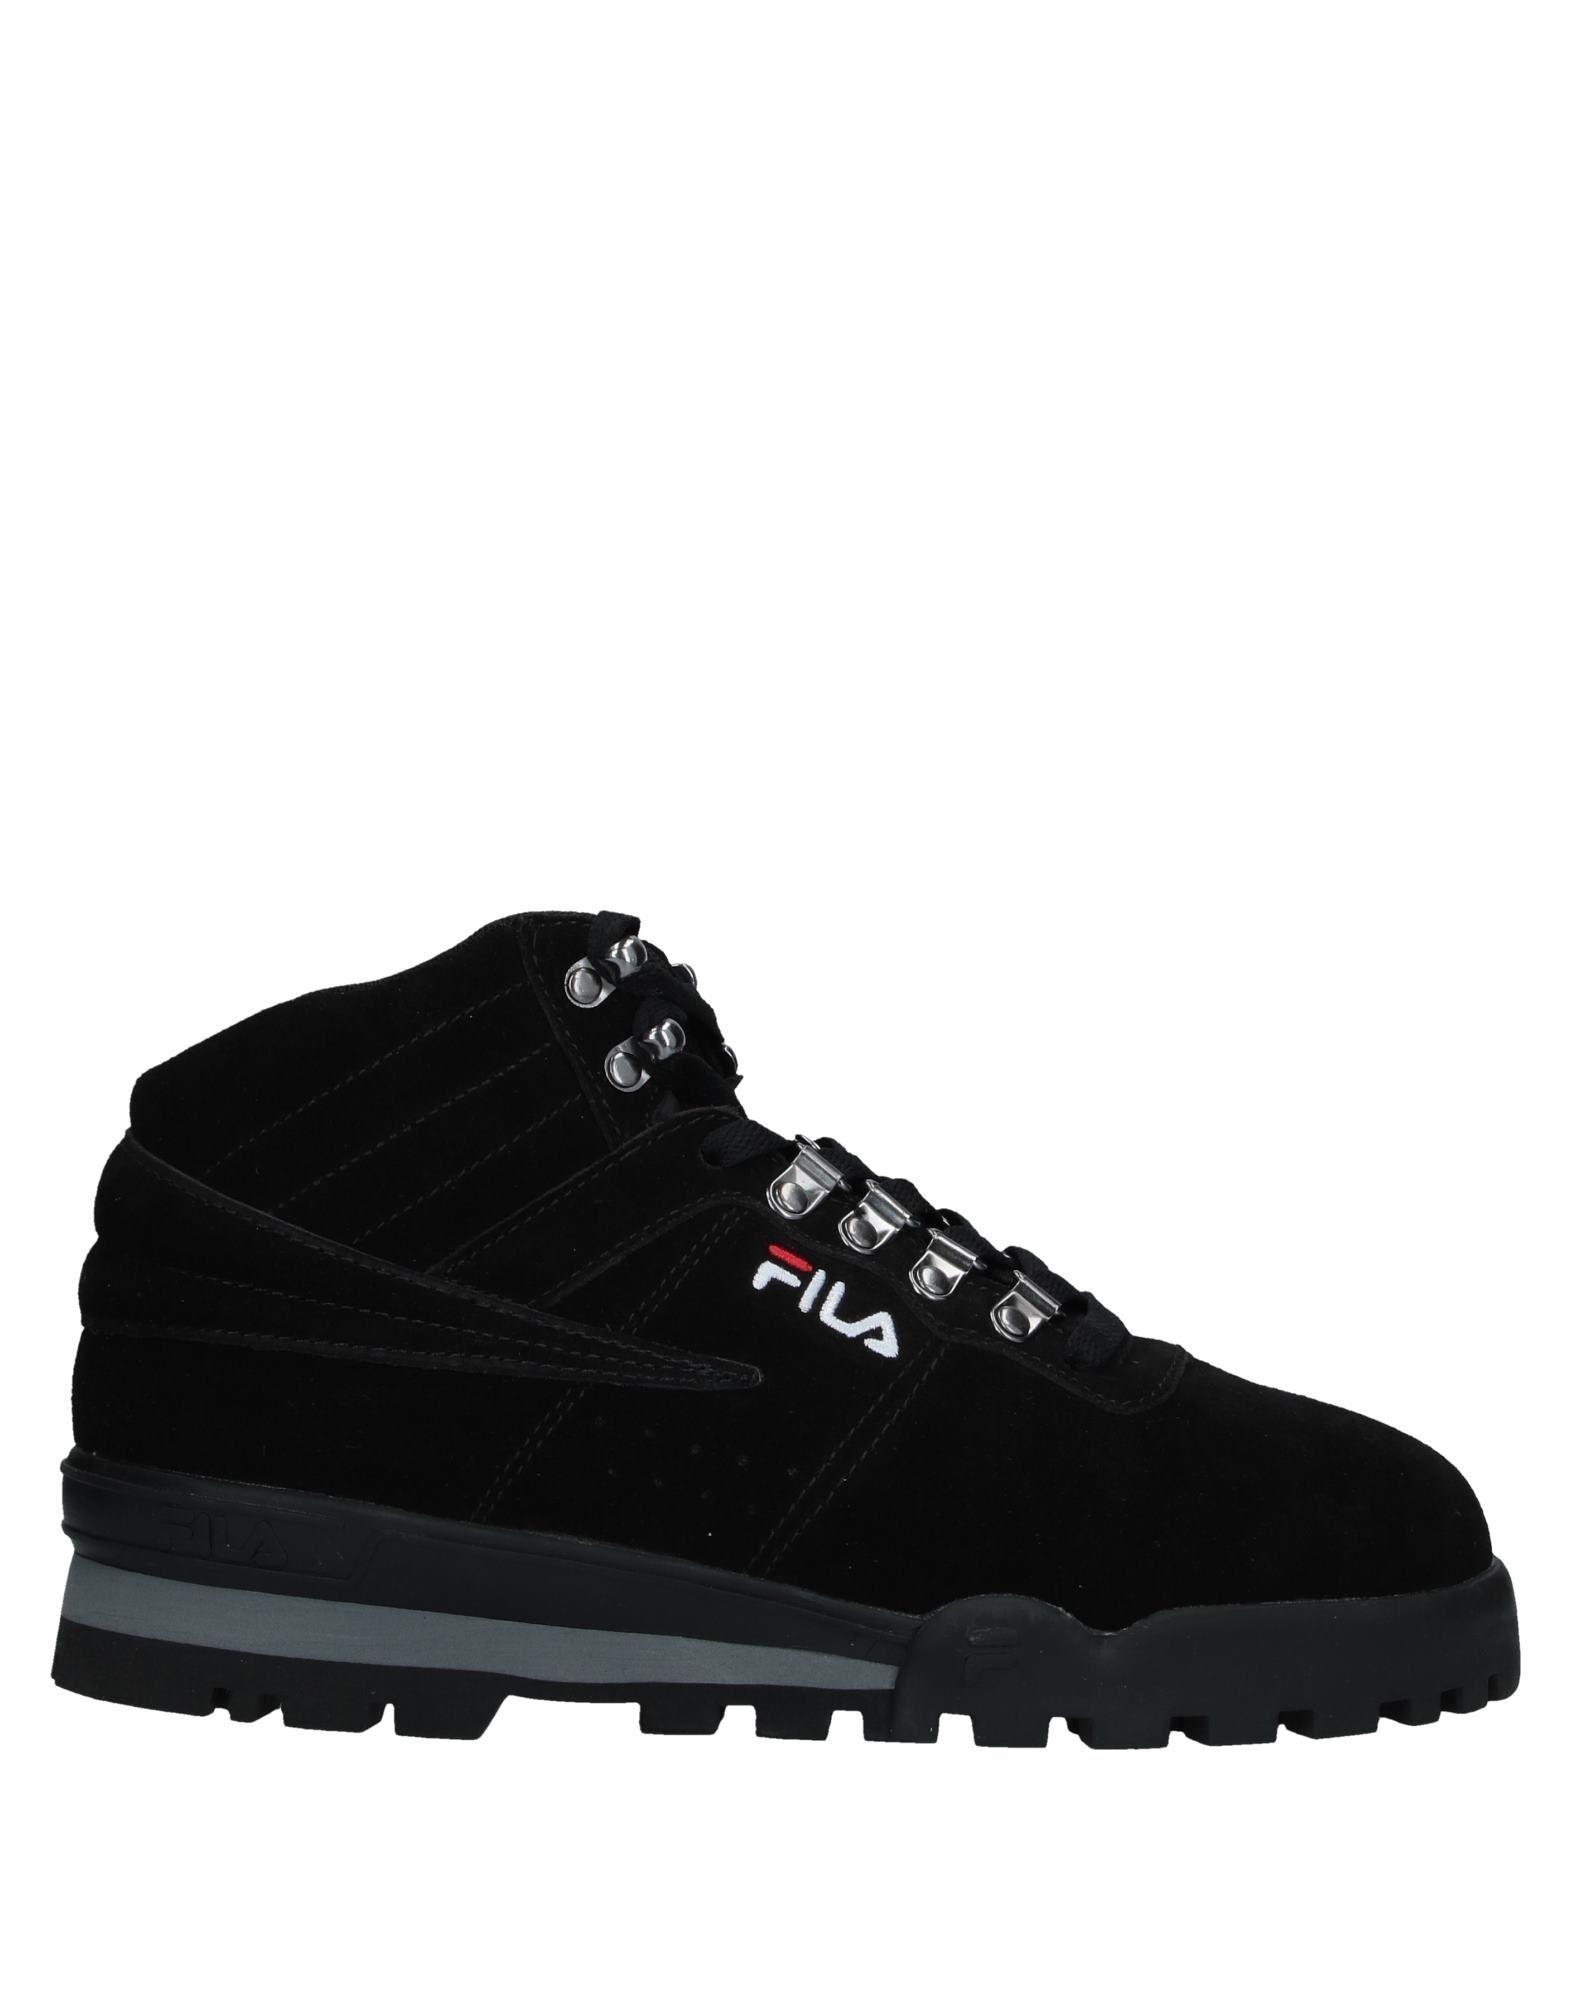 Fila Suede High-tops & Sneakers in Black for Men - Save 1% - Lyst